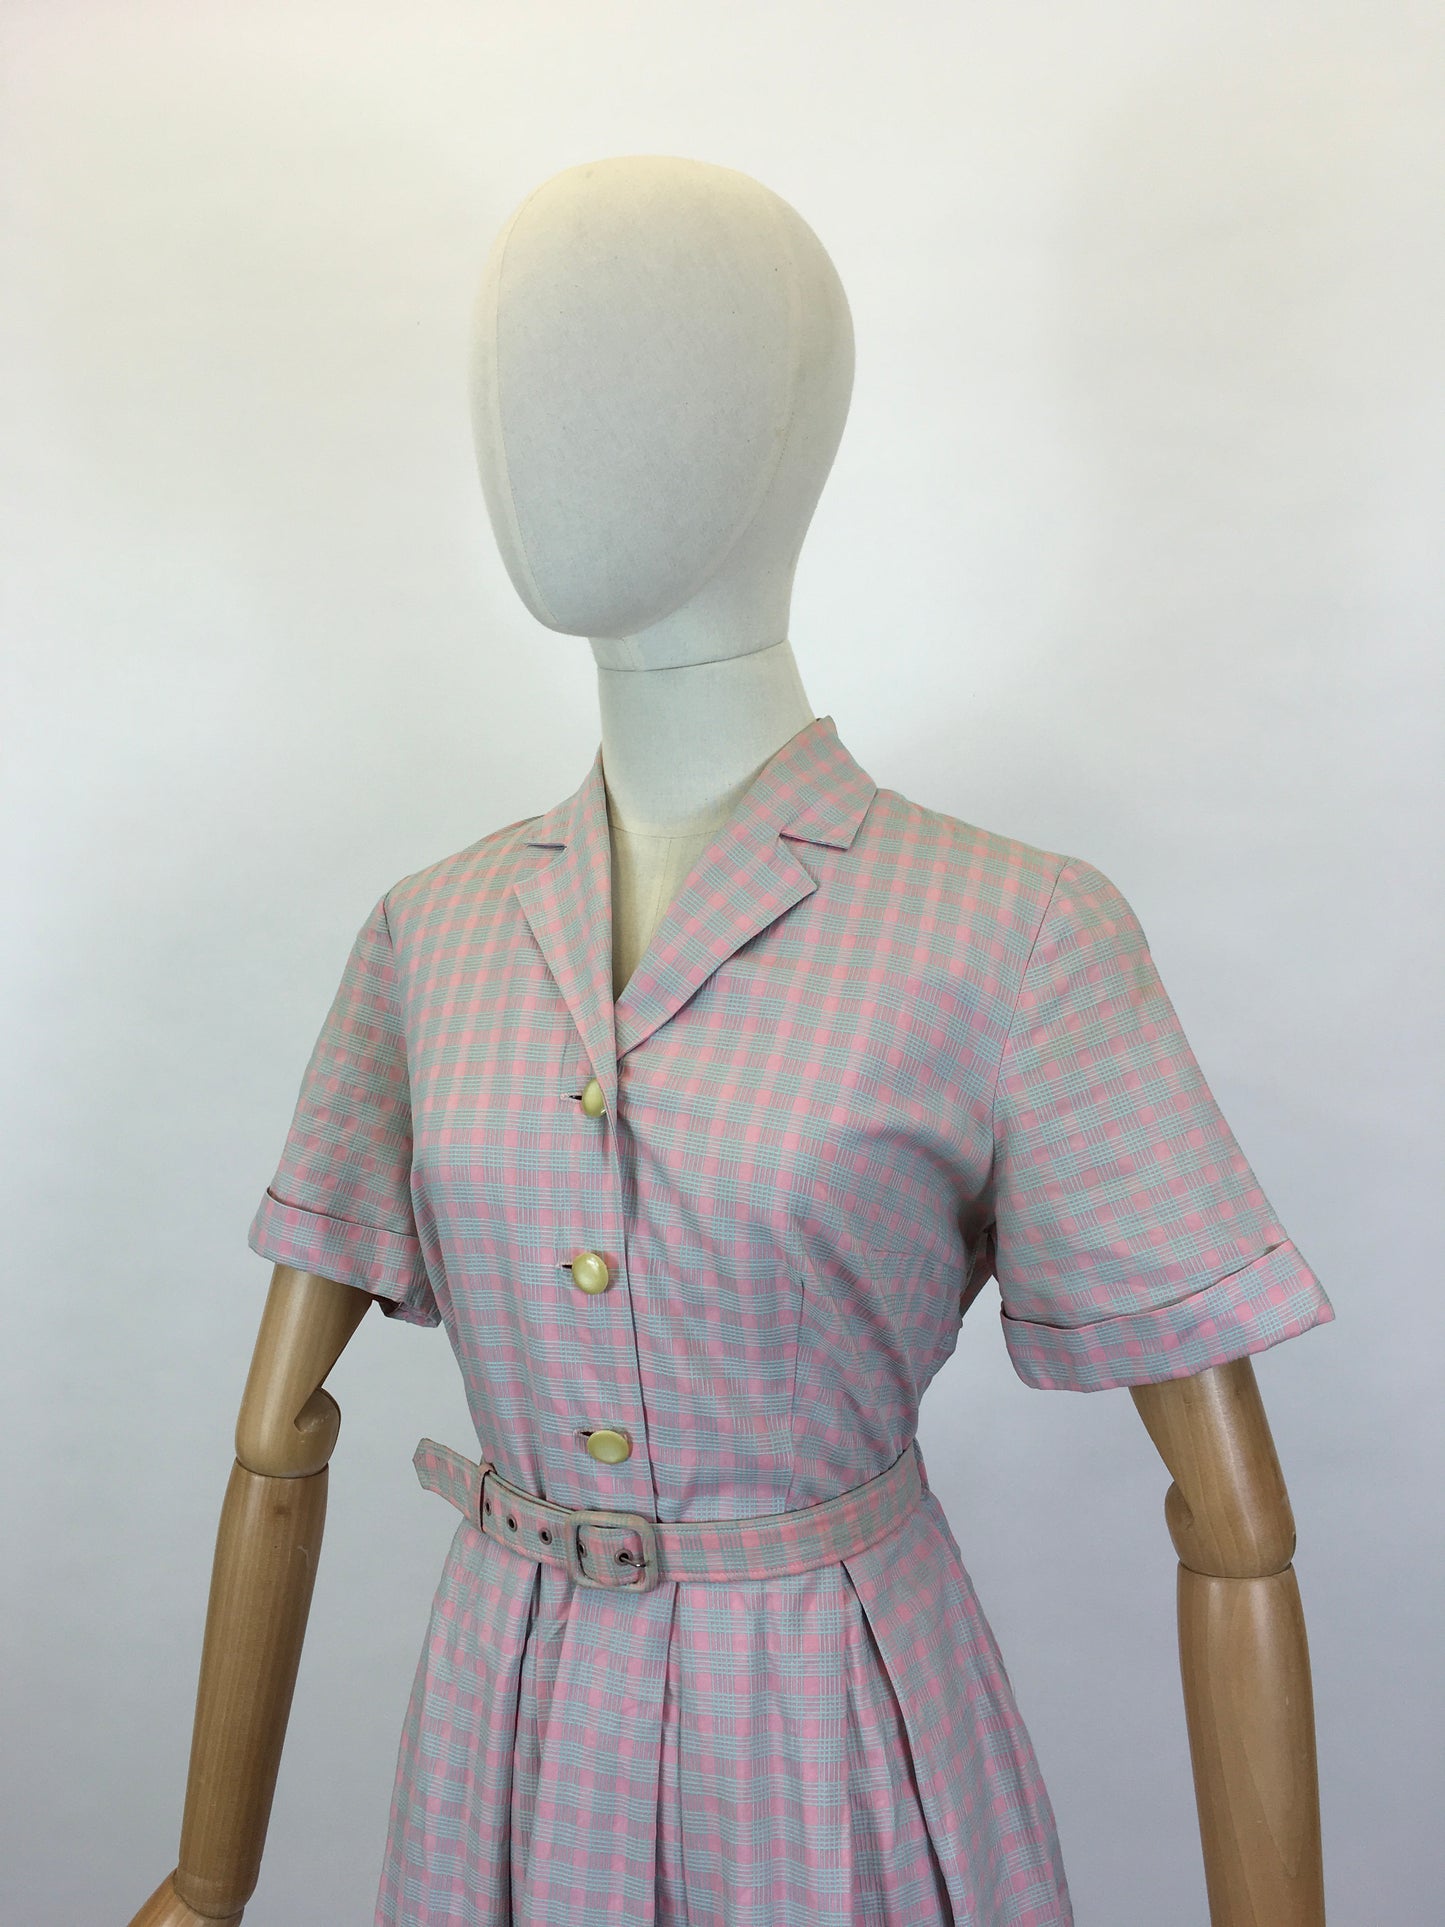 Original 1950’s Darling Cotton Day Dress - In A Muted Pink & Grey Check